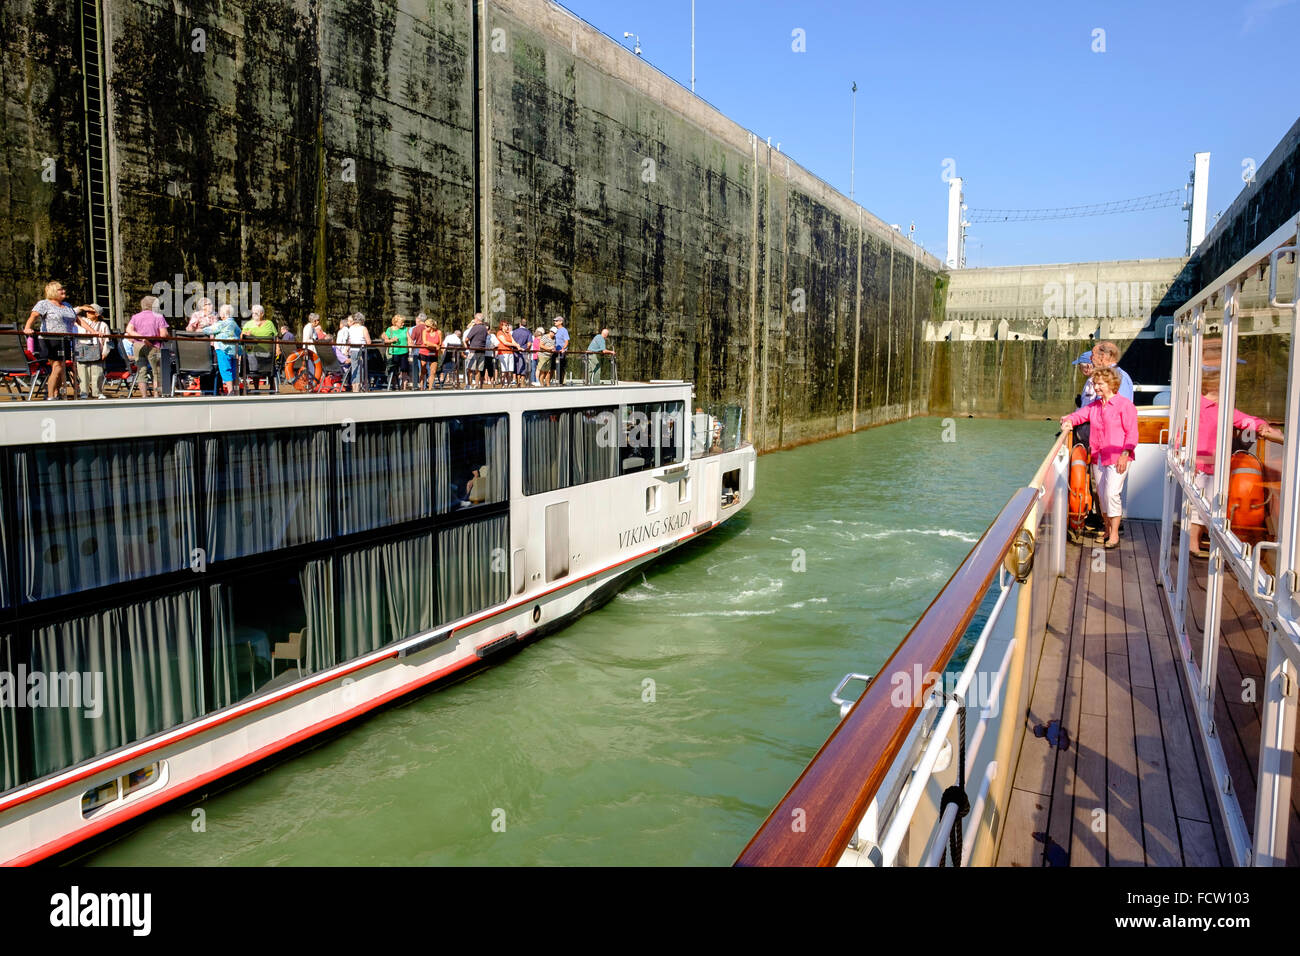 GABCIKOVO LOCK ON RIVER DANUBE IN SLOVAKIA WITH CRUISE BOATS WAITING TO GO THROUGH LOCK TOURISTS ON BOAT DECKS Stock Photo